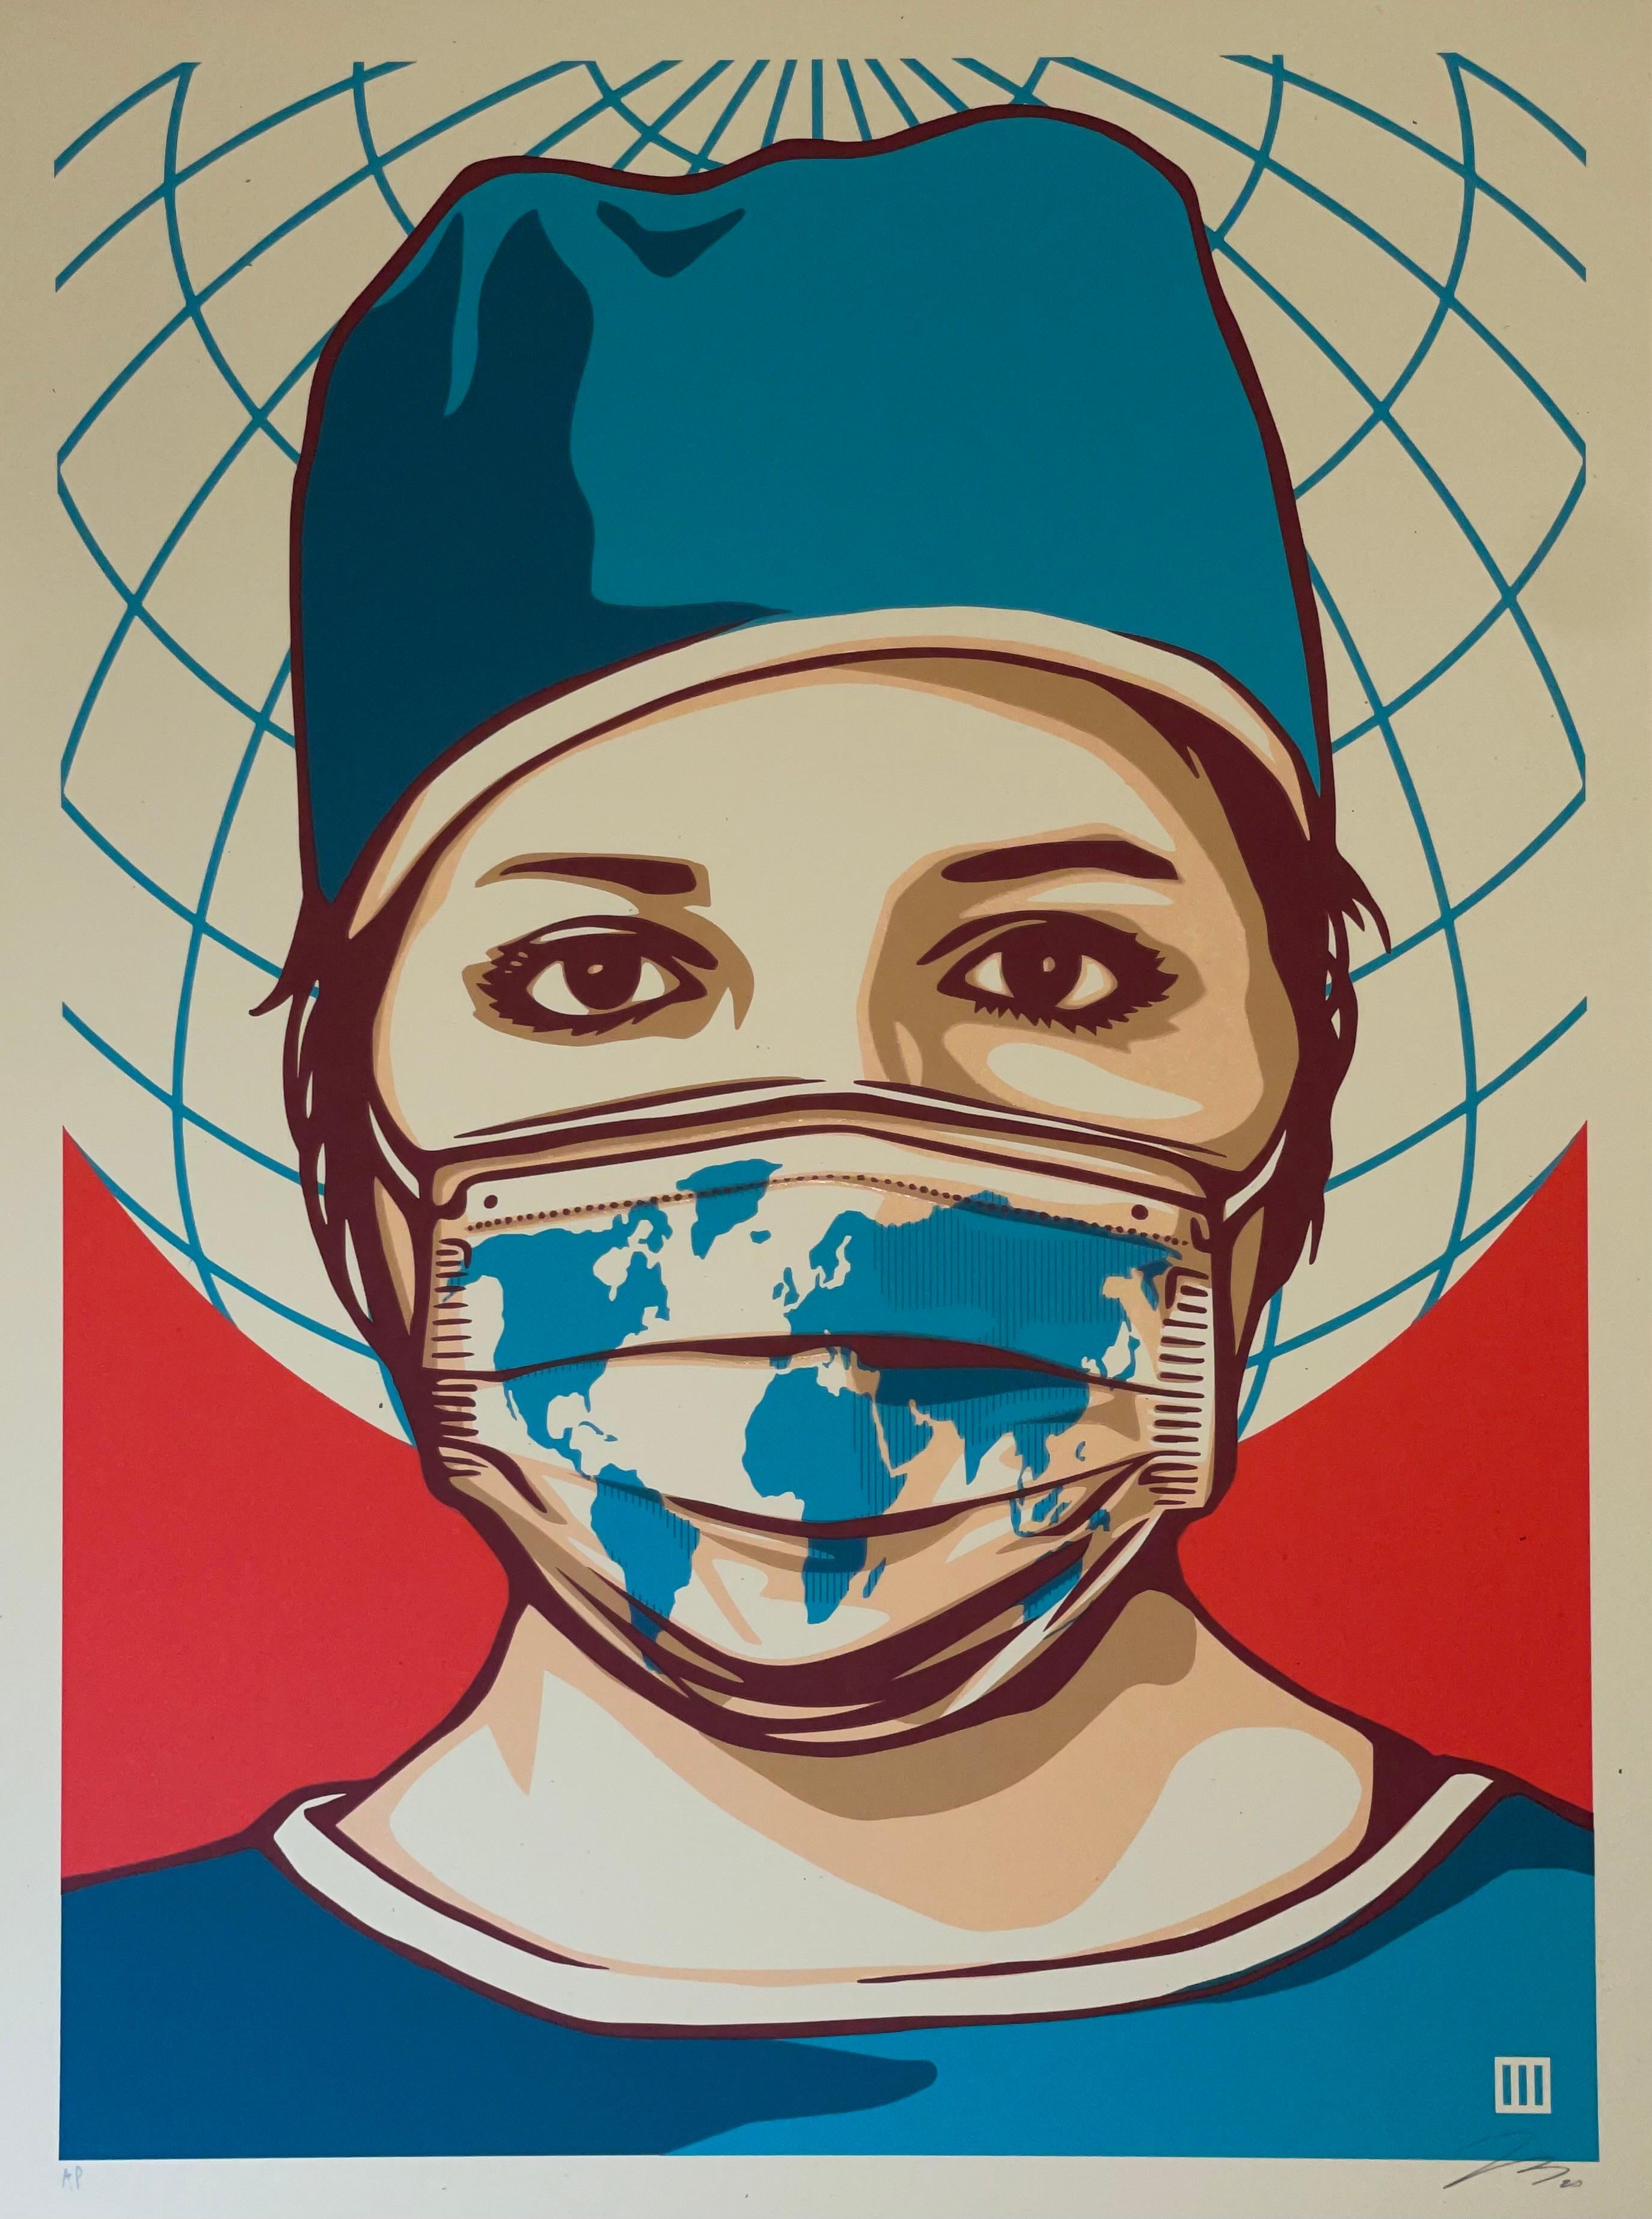 Thomas Wimberly "Global Forefront" Thank you Print For Pandemic Workers Nurse AP